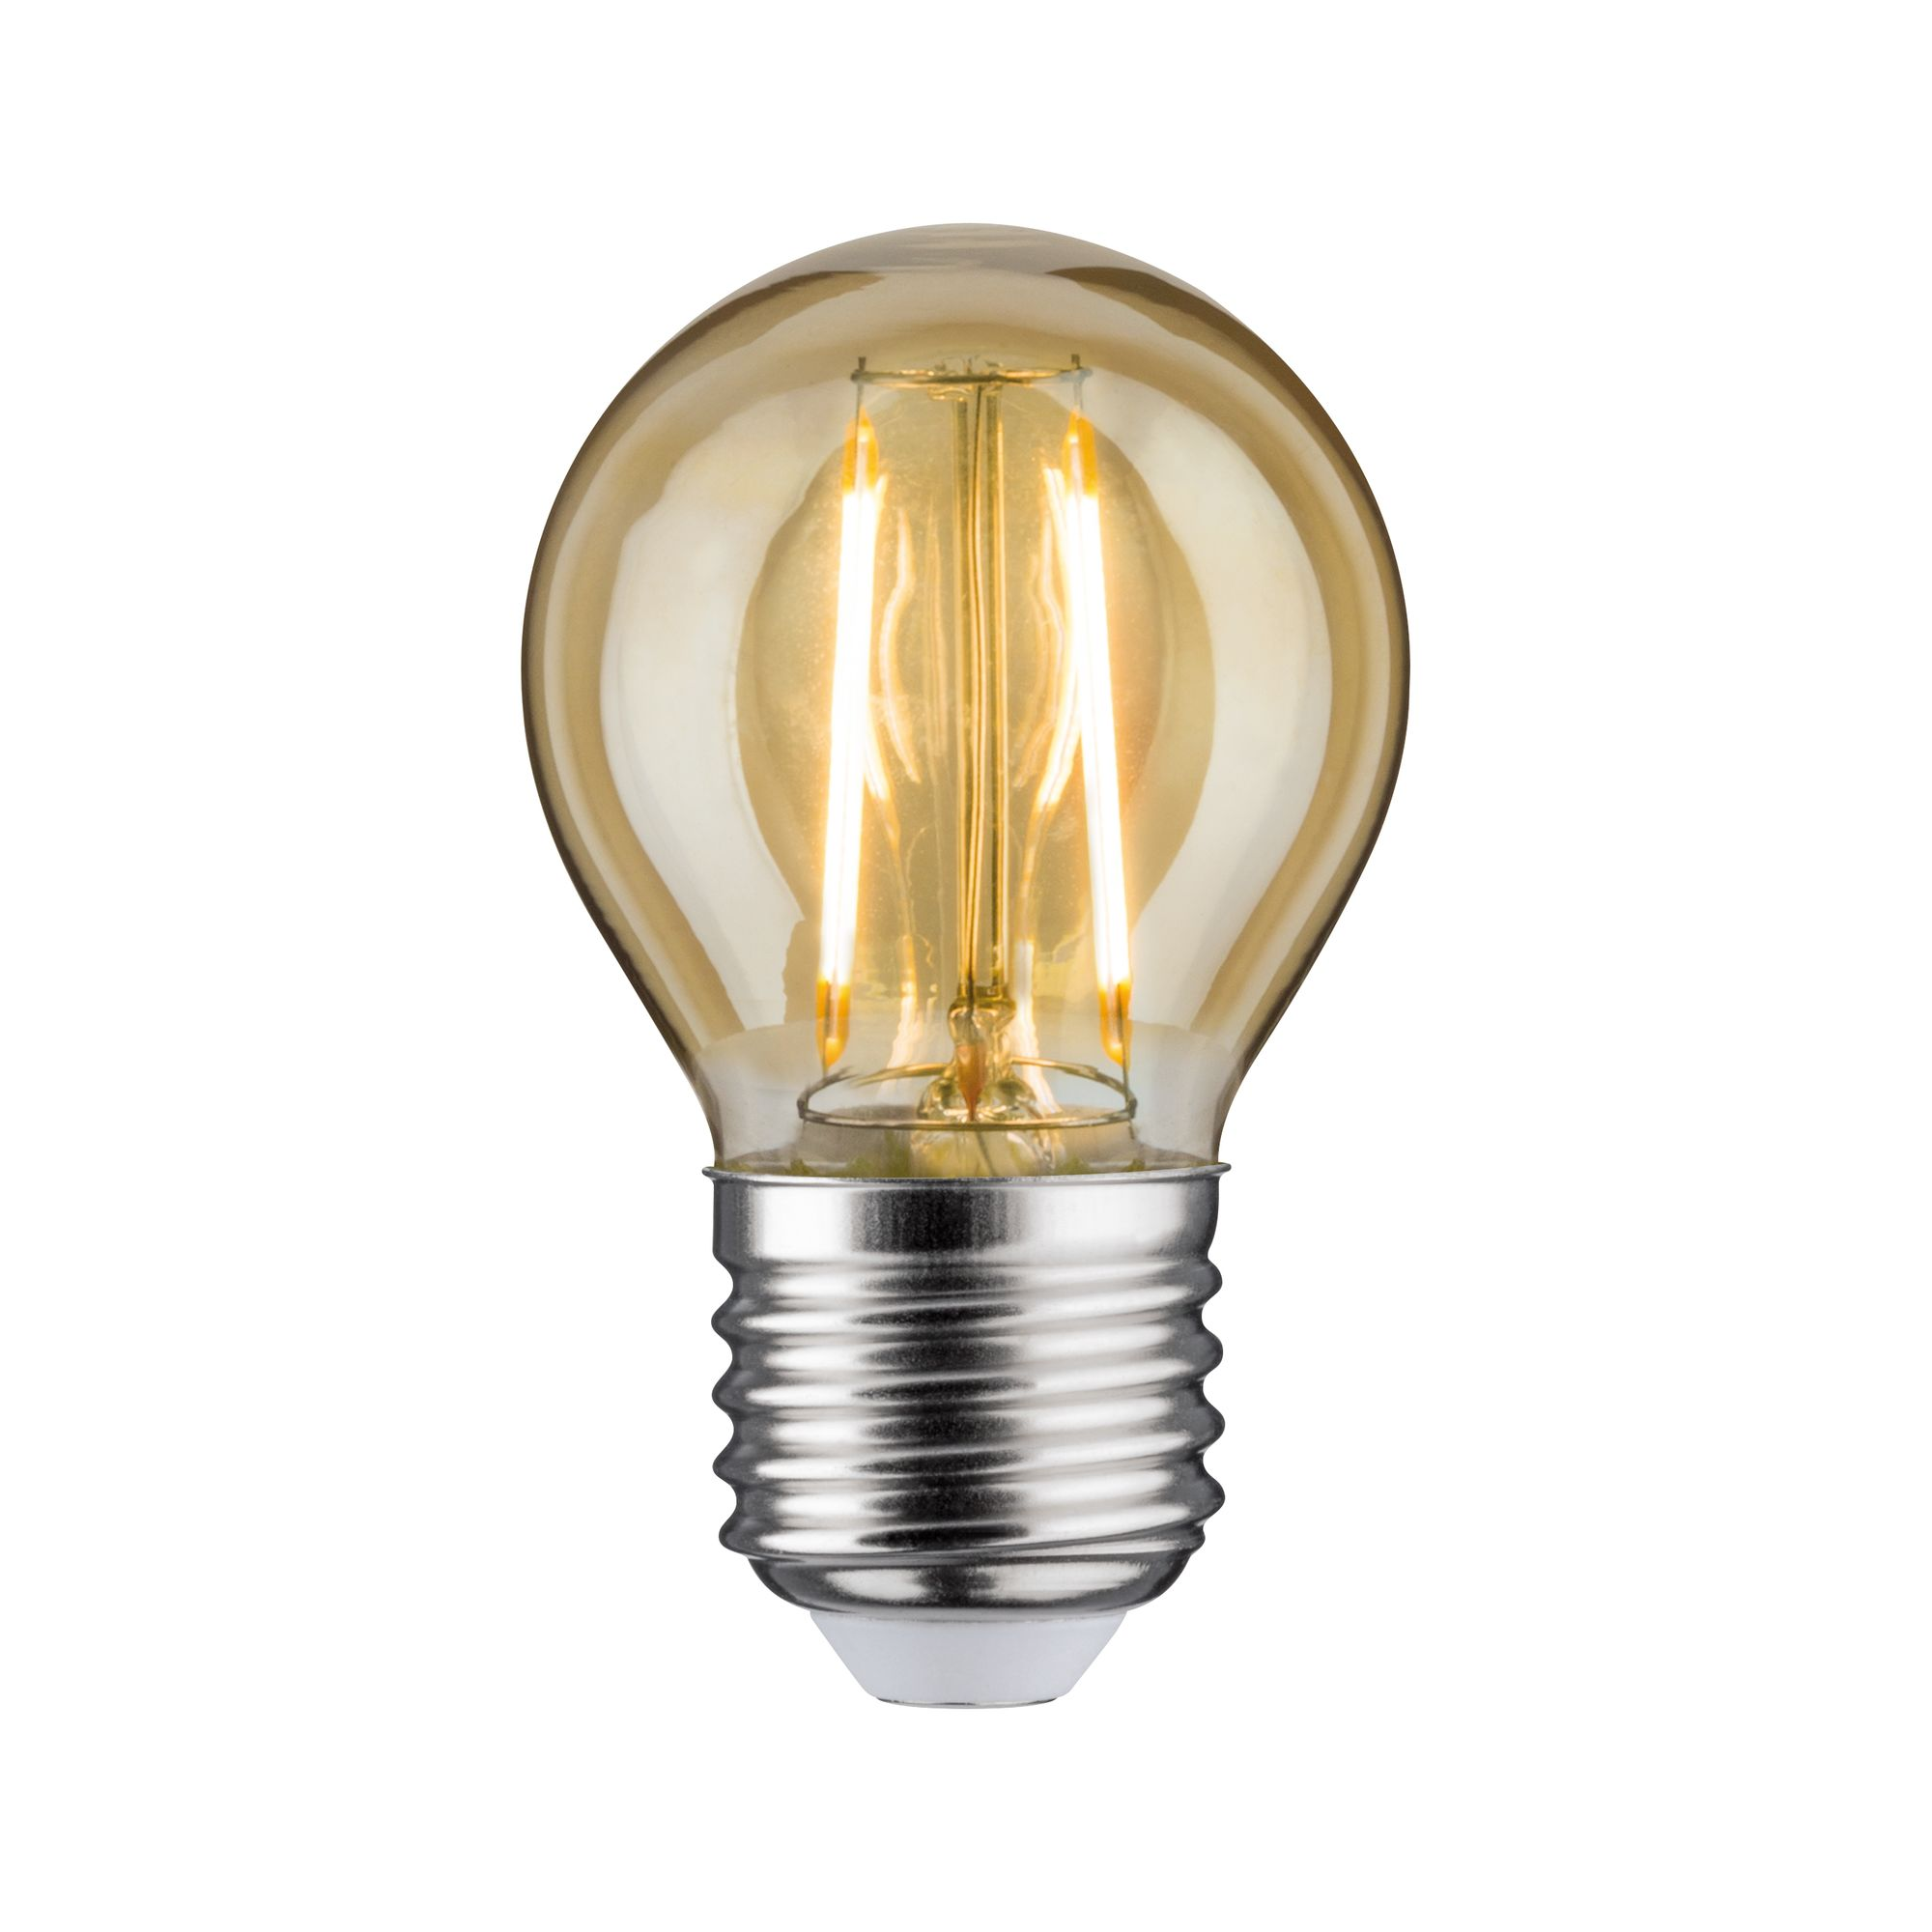 LED-Tropfenlampe E27 2,6W (26W) 260 lm warmgold + product picture